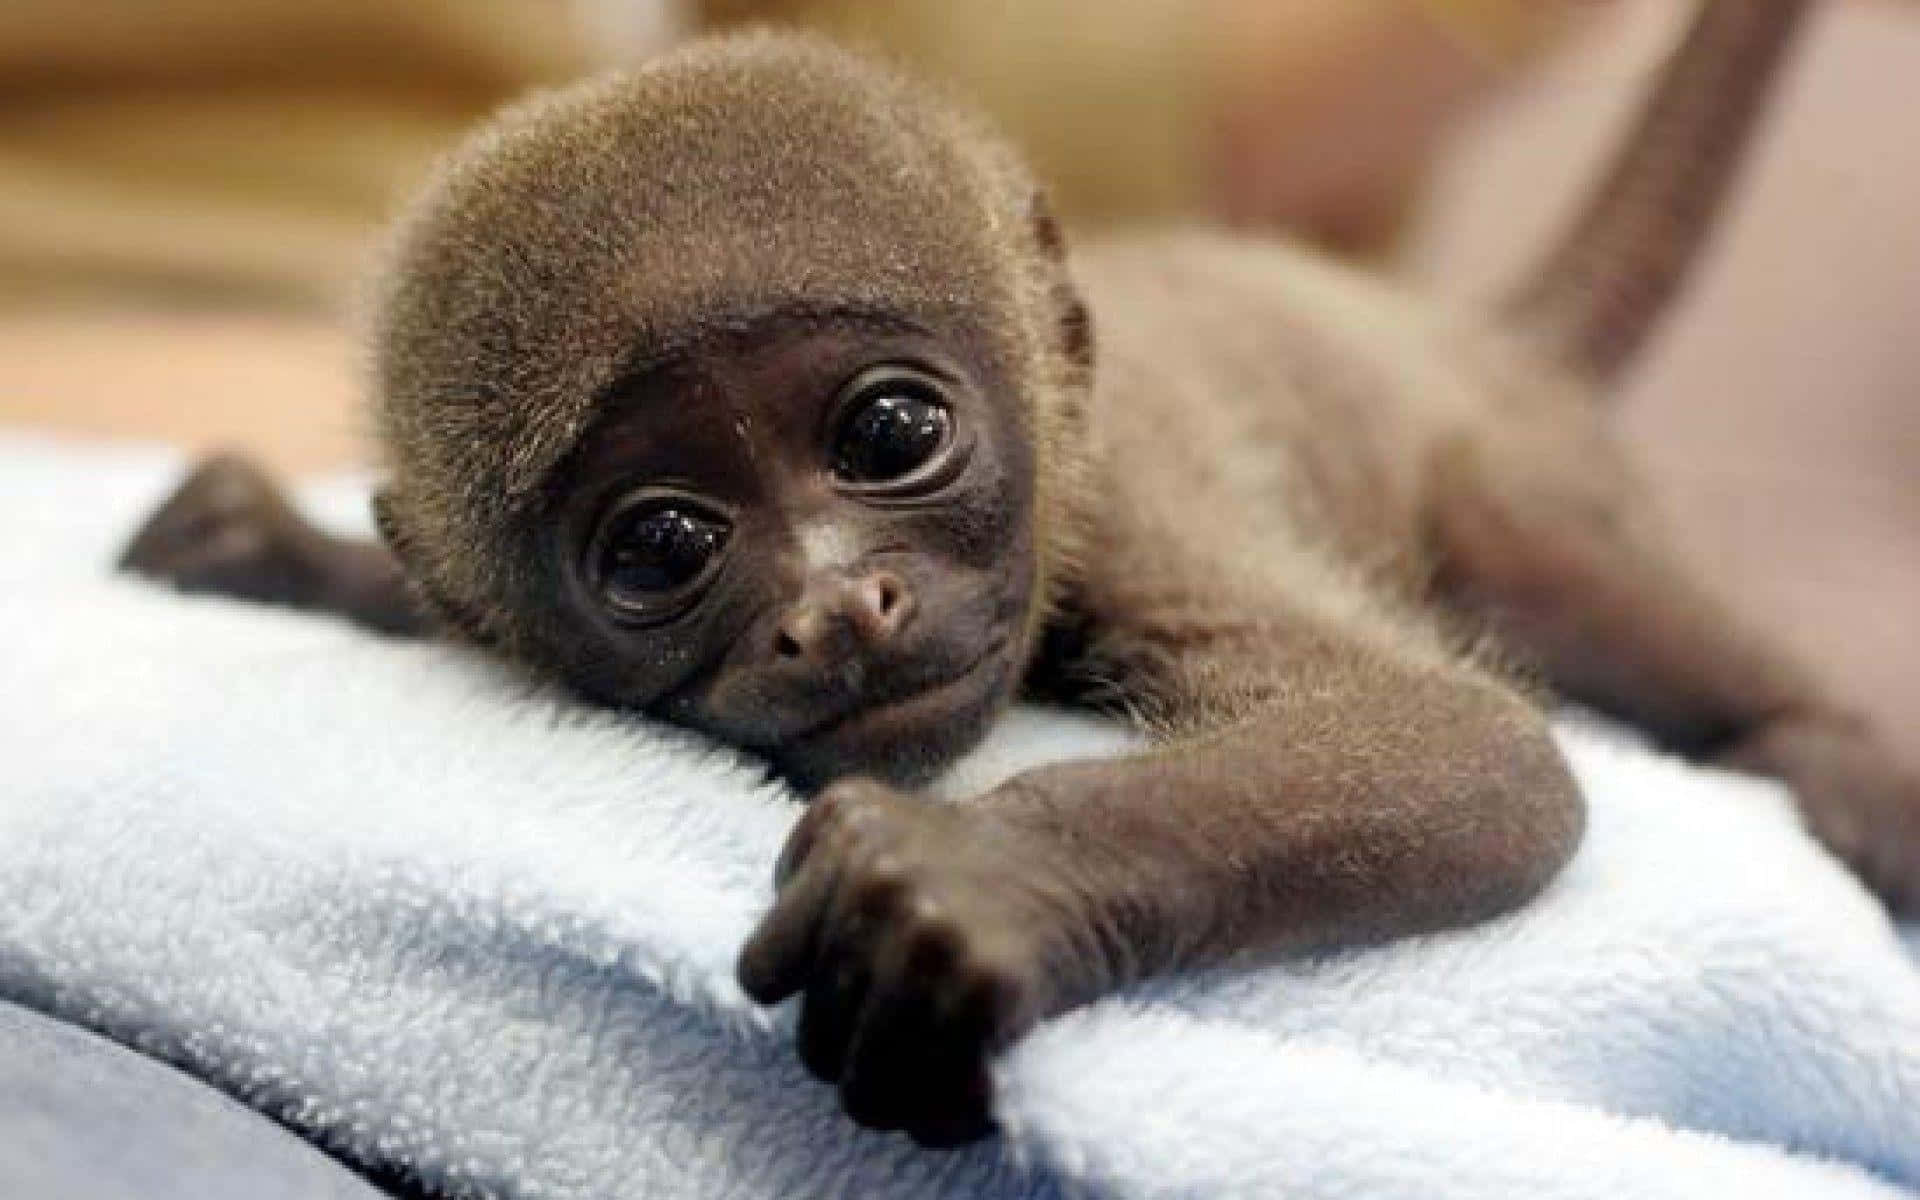 Baby Monkey Picture